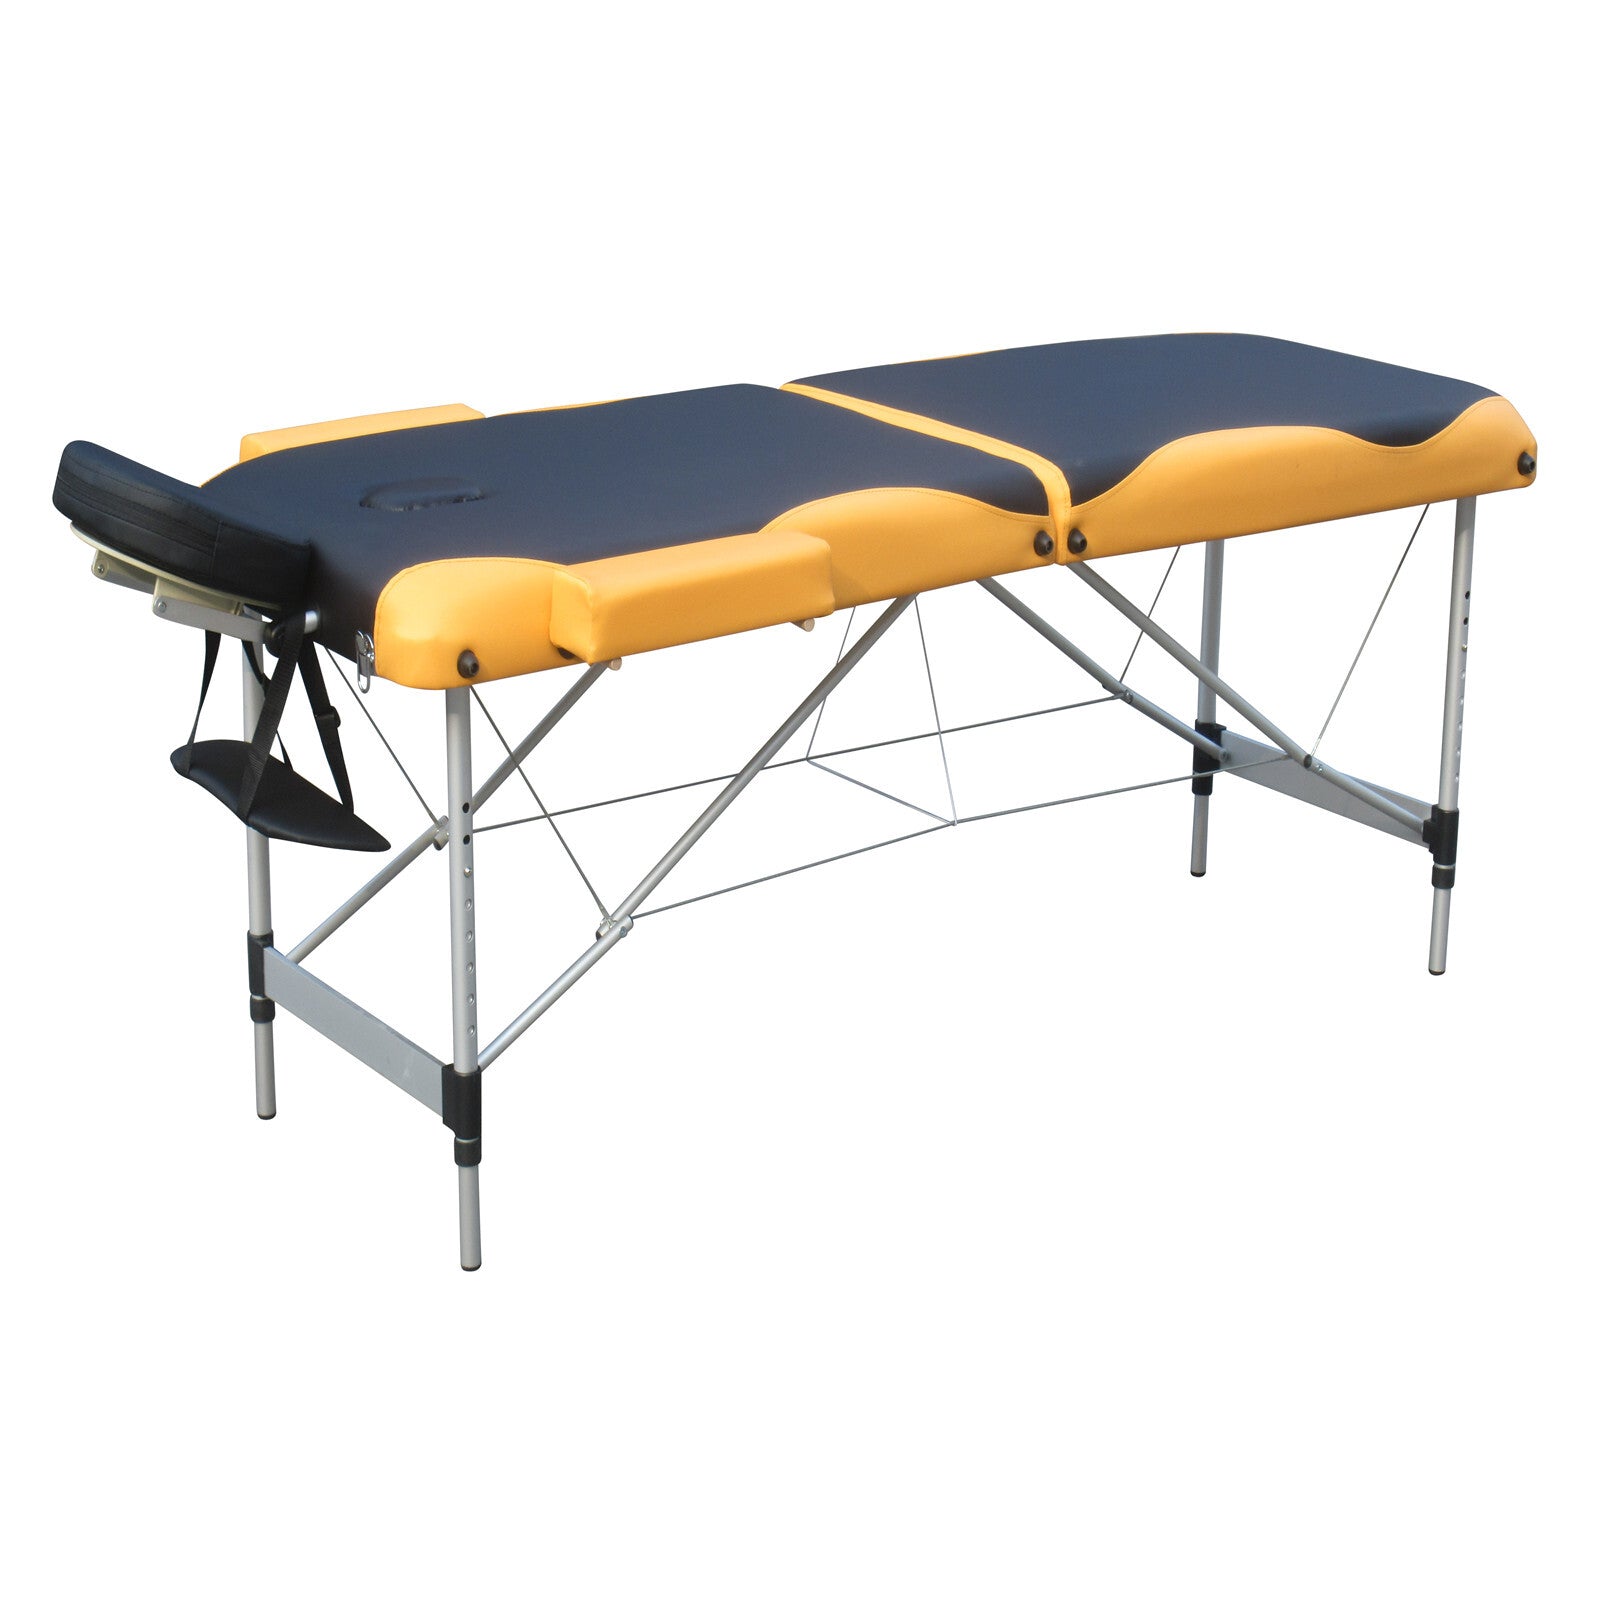 YES4HOMES 2 Fold Portable Aluminium Massage Table Massage Bed Beauty Therapy